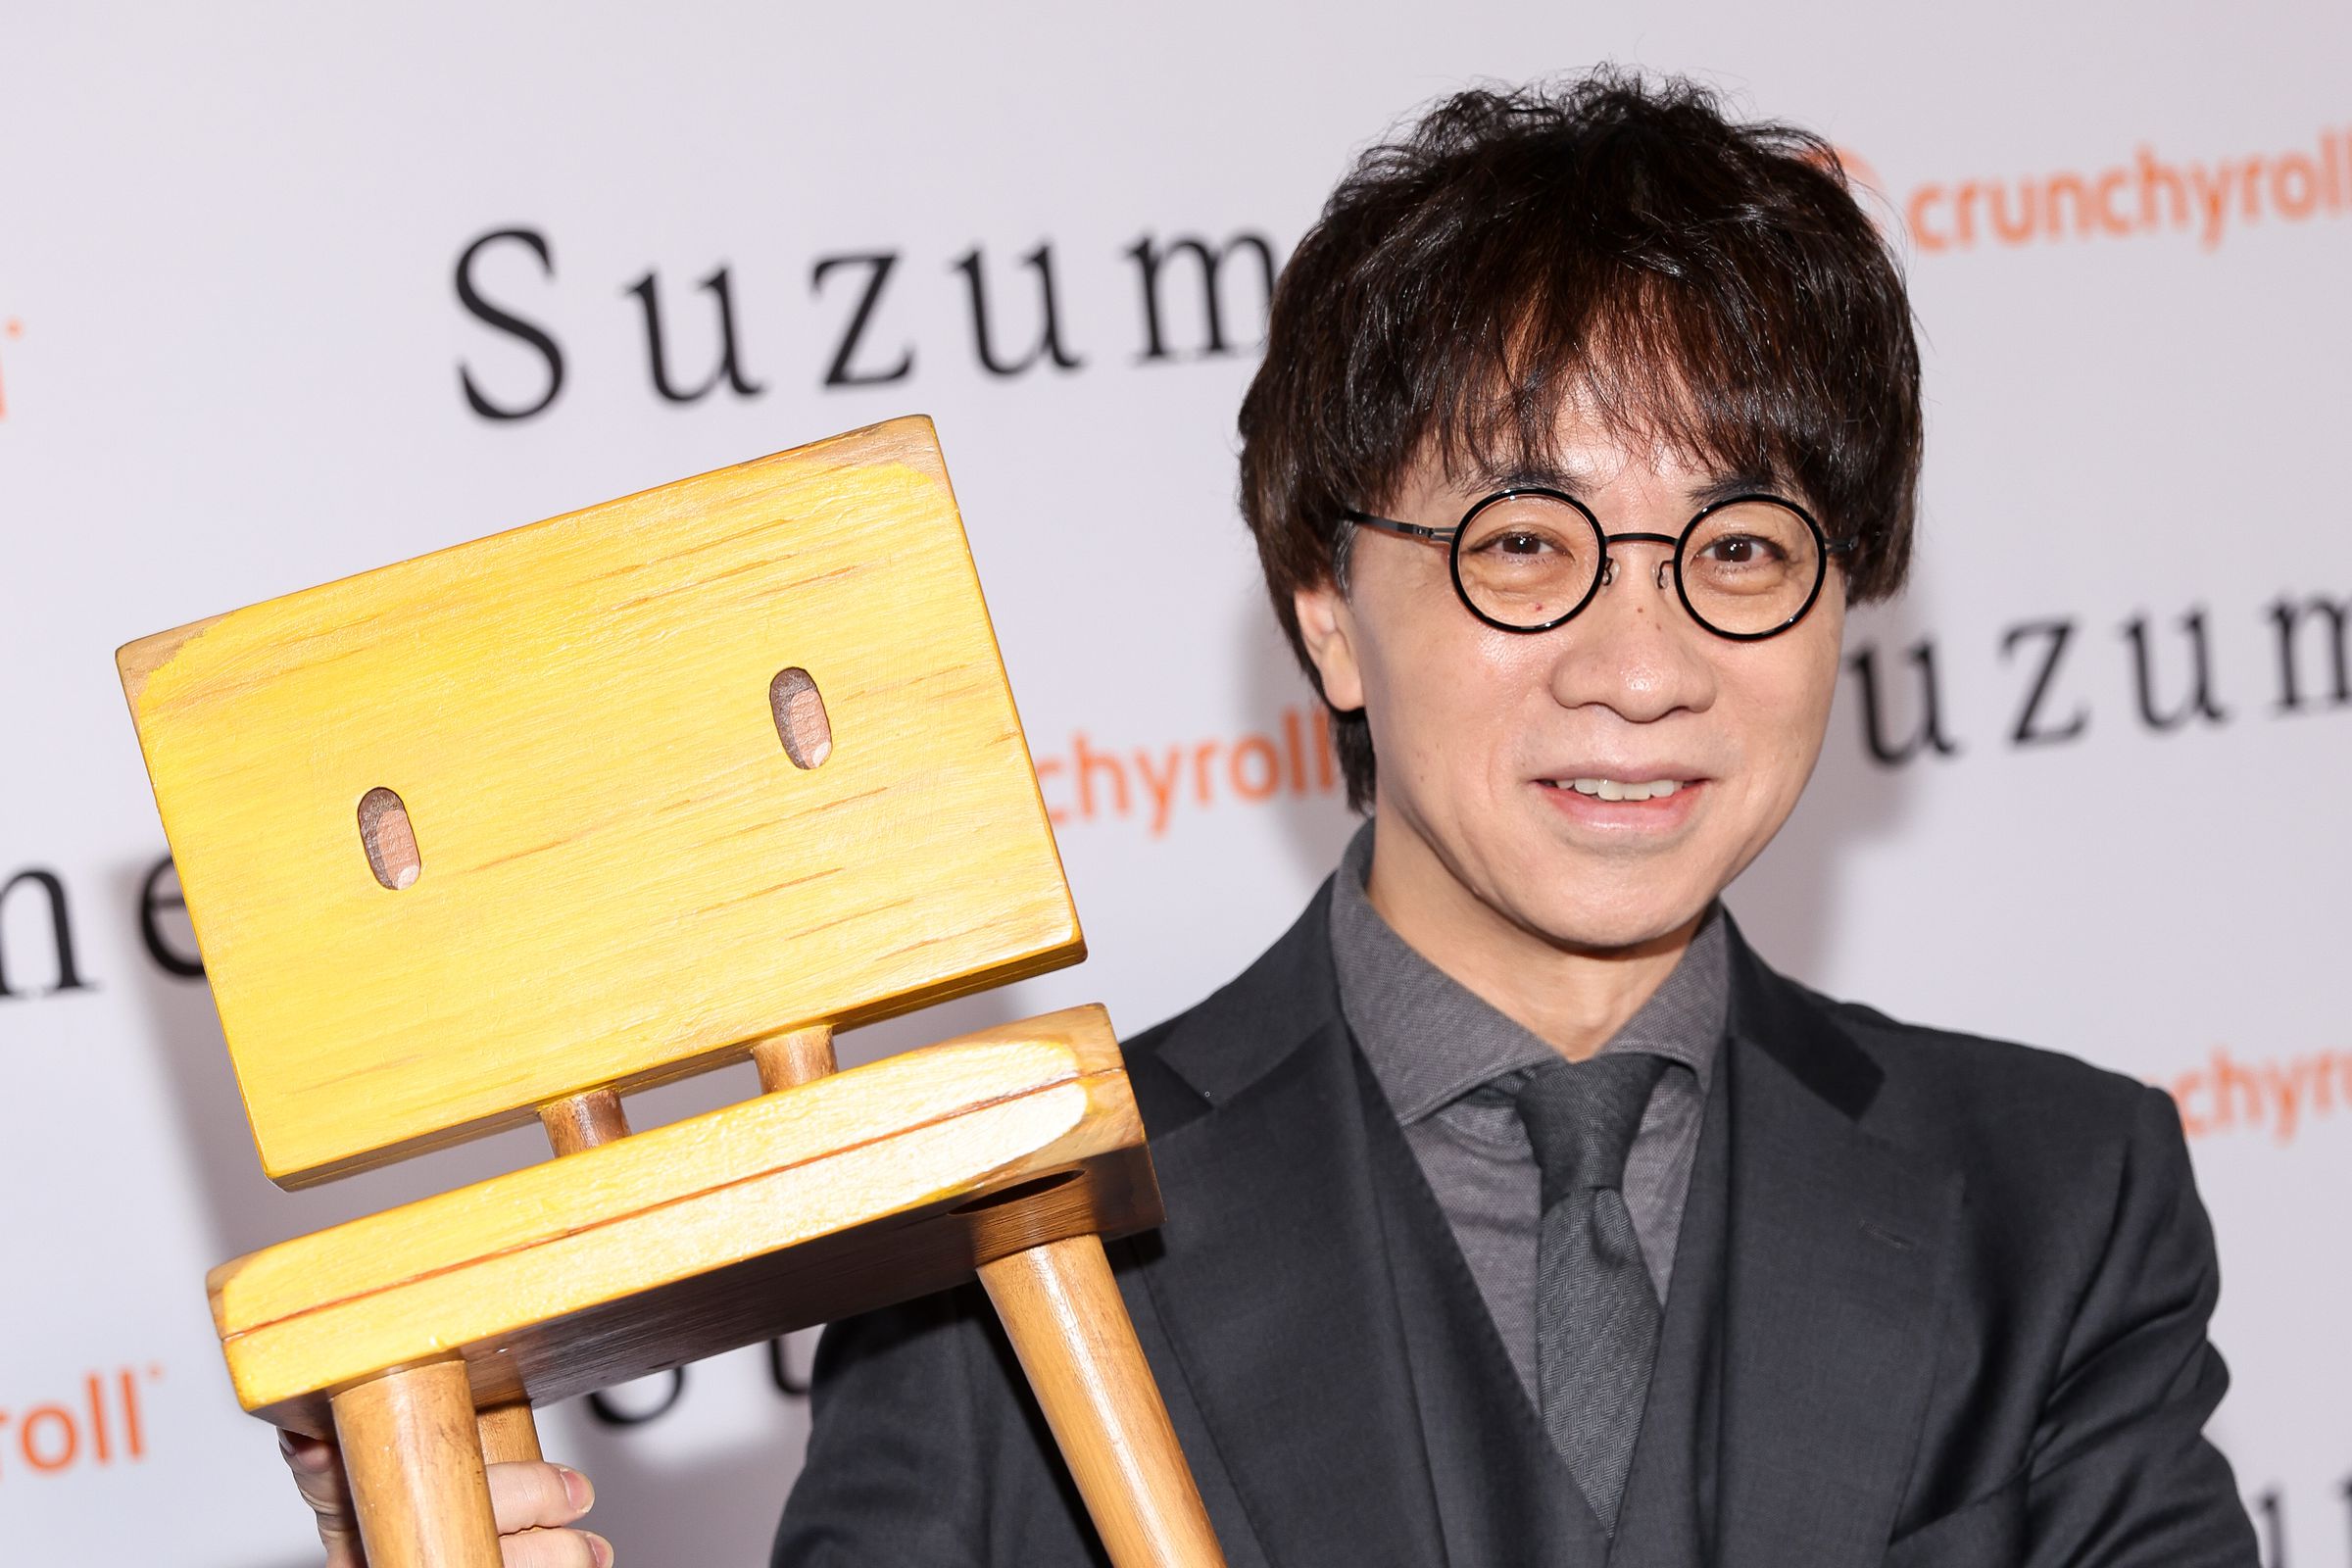 A bespectacled man in a black suit with a steel gray shirt and tie holding up a wooden chair.